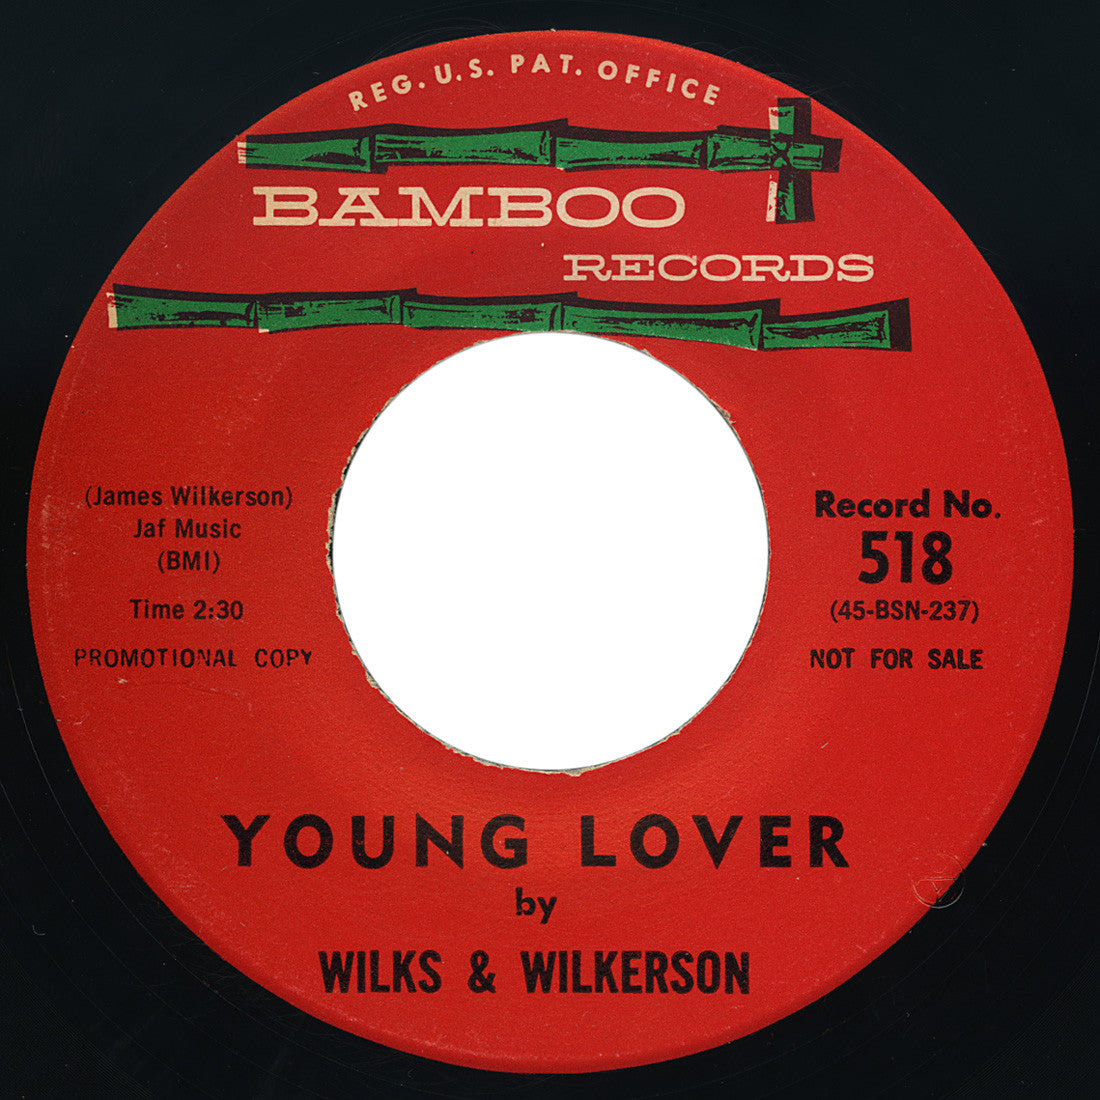 Wilks & Wilkerson – I Found A New Love / Young Lover – Bamboo